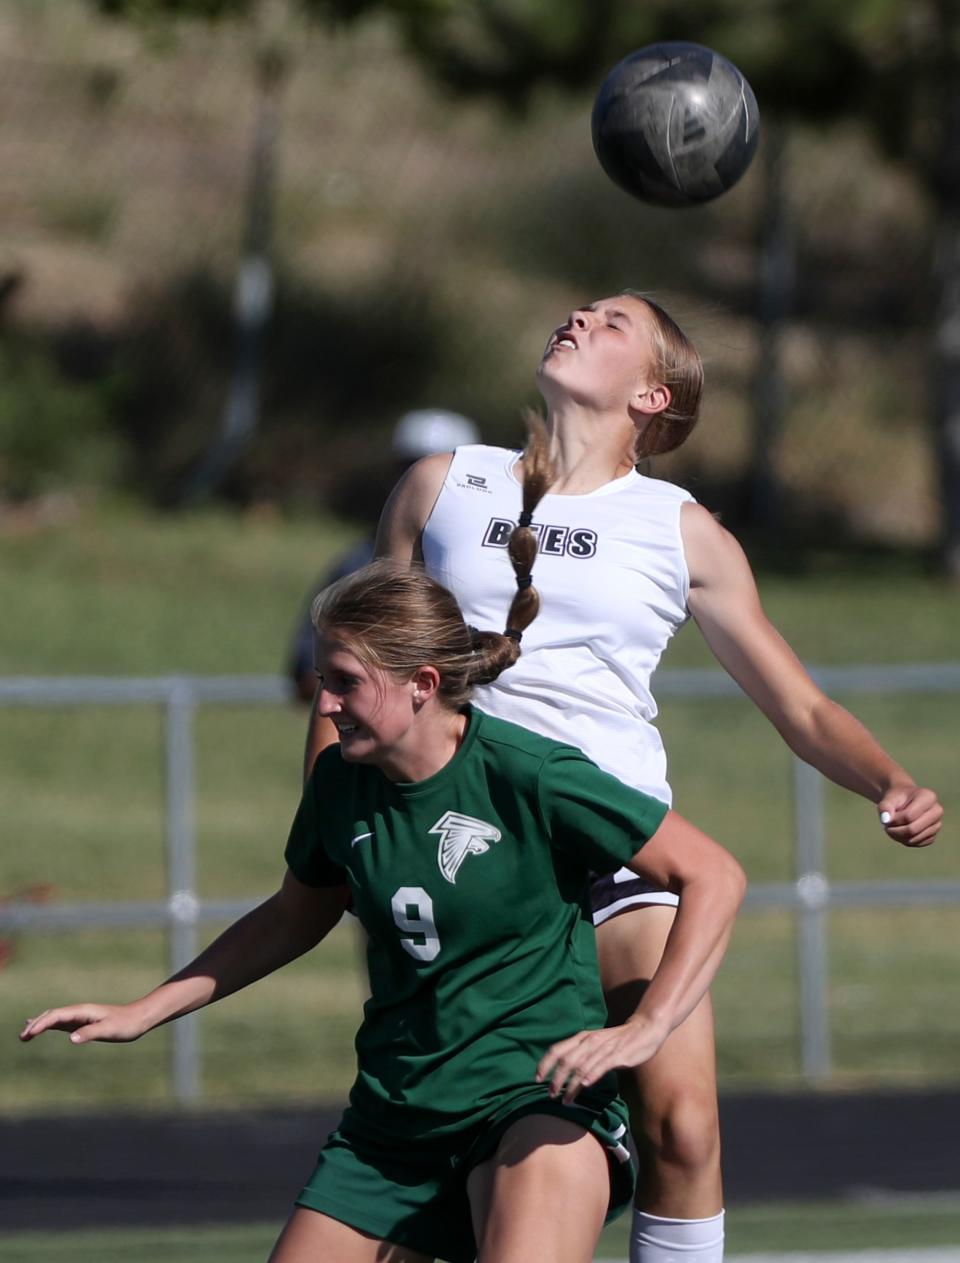 Clearfield’s Carlie Hobbs and Box Elder’s Halli Wright reach for a header during a girls varsity soccer game at Clearfield High School in Clearfield on Thursday, Sept. 14, 2023. Clearfield won 2-1. | Kristin Murphy, Deseret News